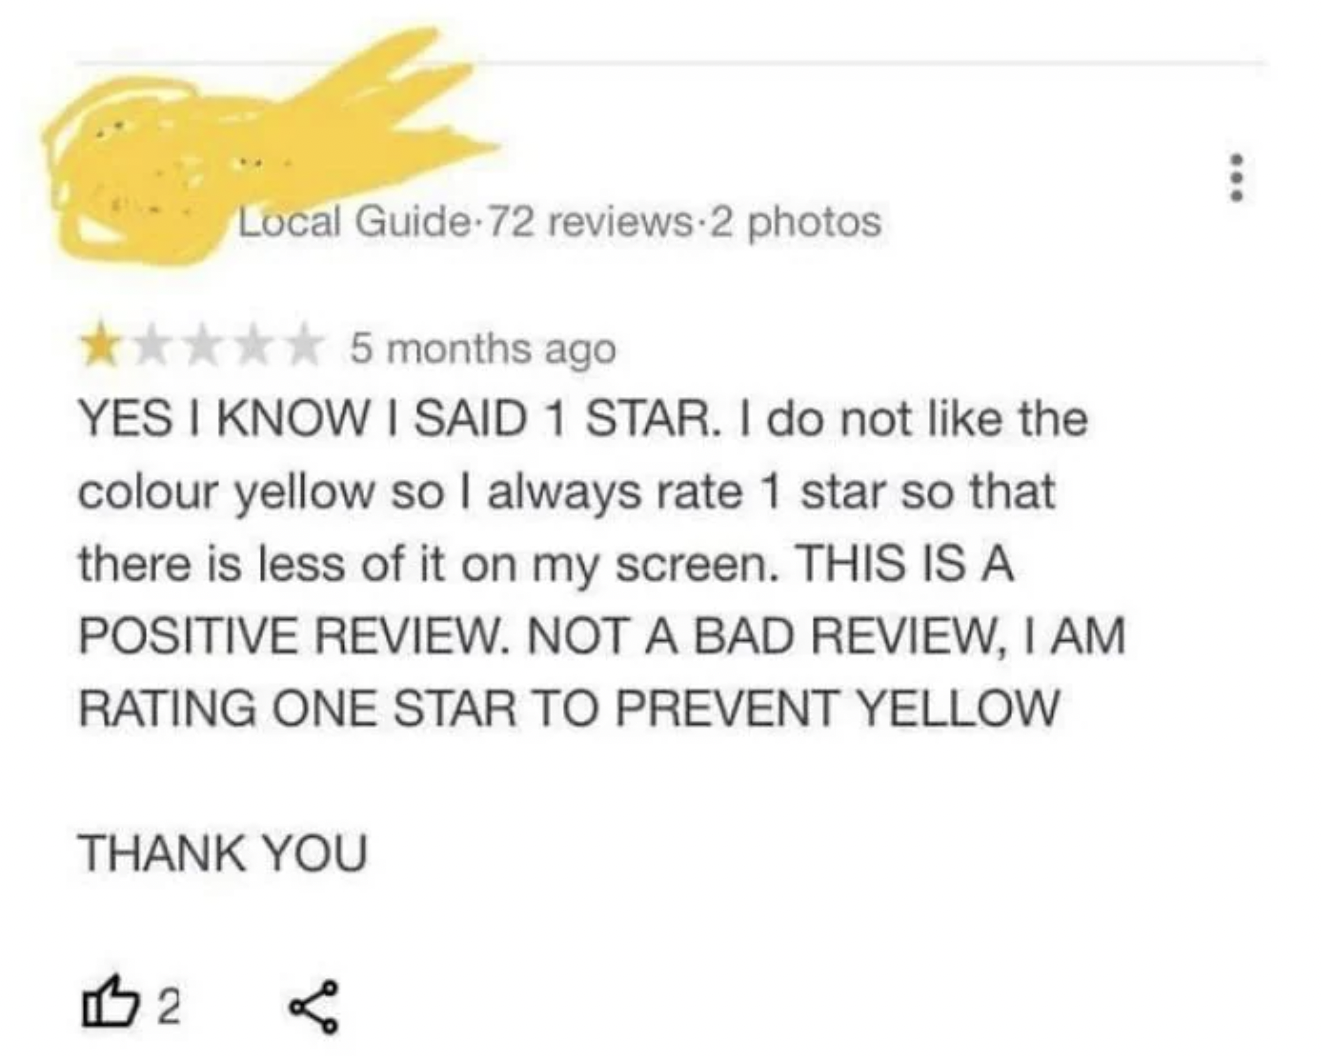 bad 1 star reviews - Local Guide72 reviews 2 photos 5 months ago Yes I Know I Said 1 Star. I do not the colour yellow so I always rate 1 star so that there is less of it on my screen. This Is A Positive Review. Not A Bad Review, I Am Rating One Star To Pr